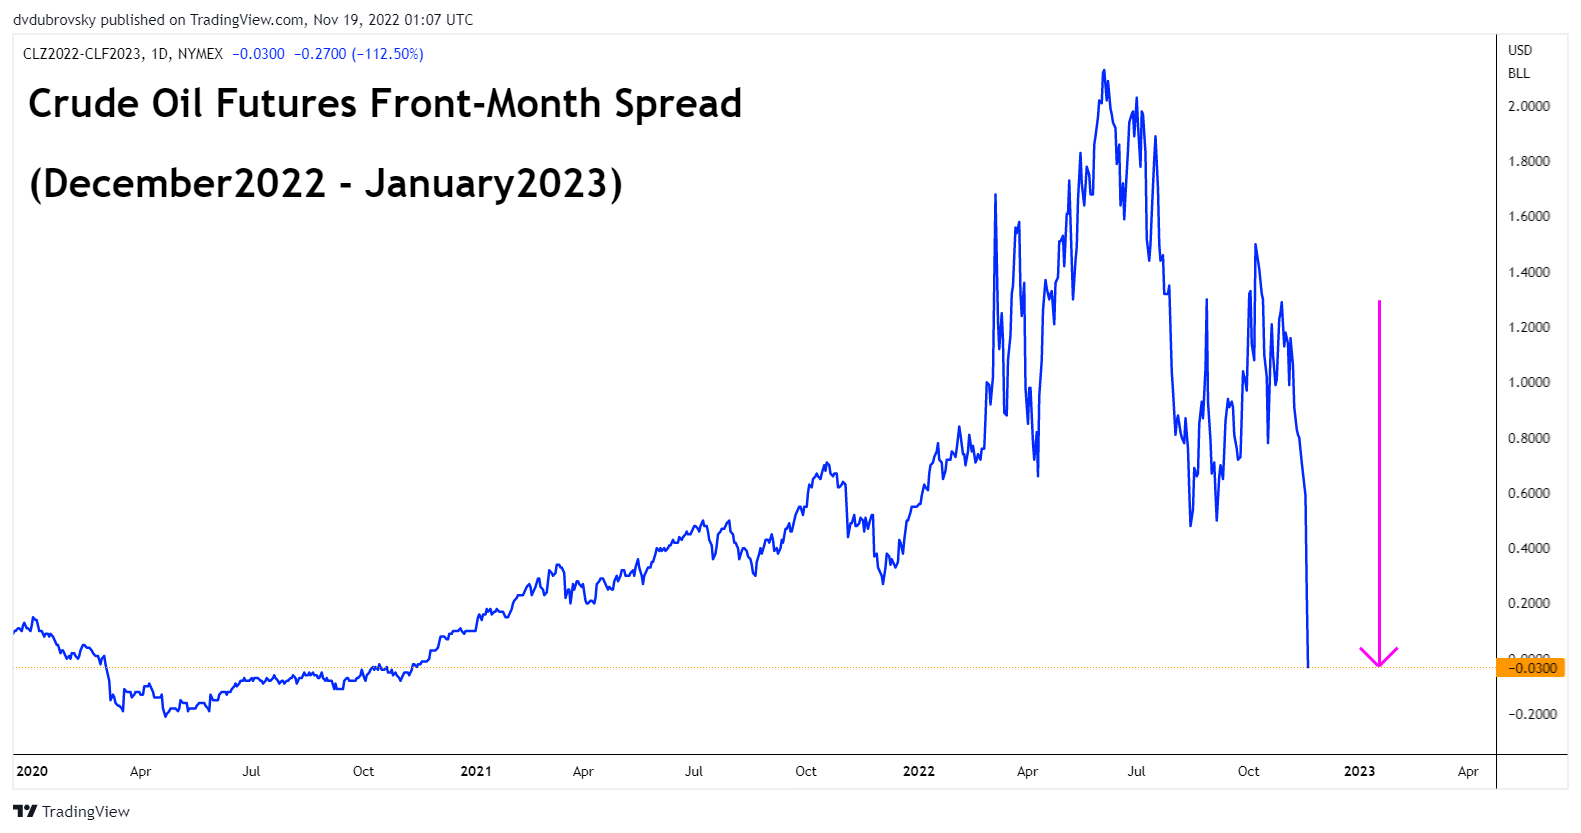 Crude Oil Futures Front-Month Spread